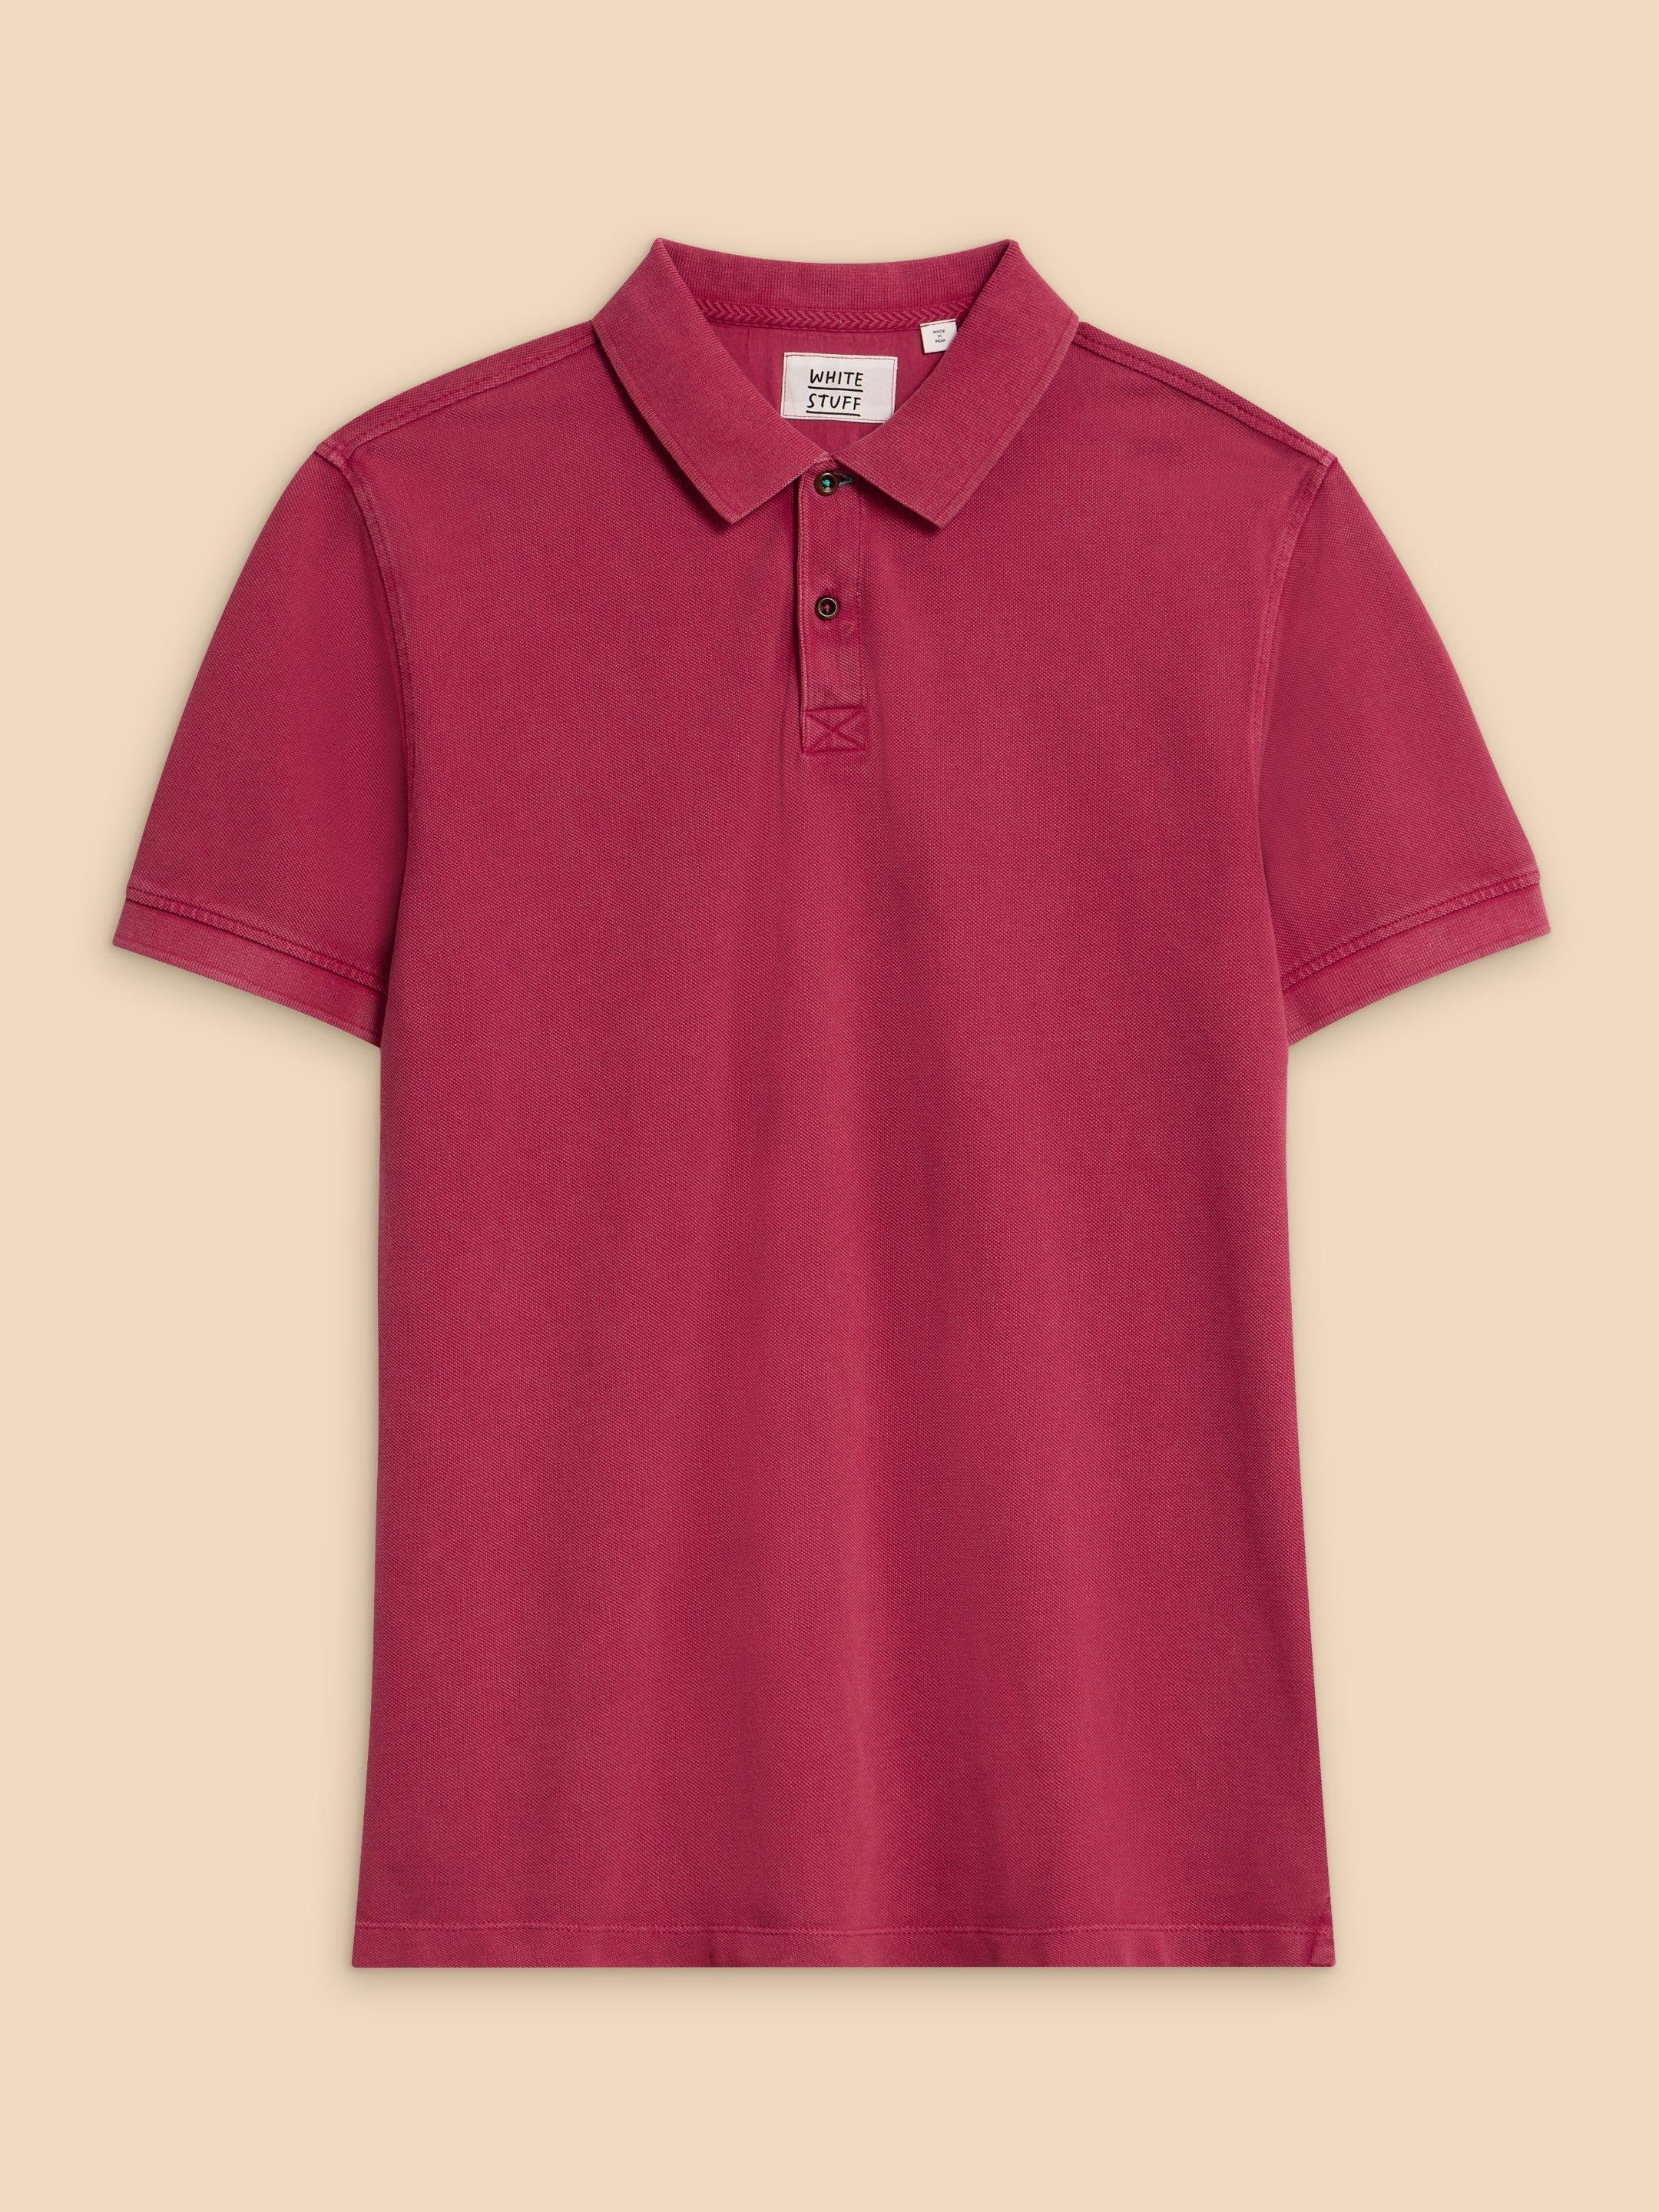 Utility Polo in DEEP PINK - FLAT FRONT